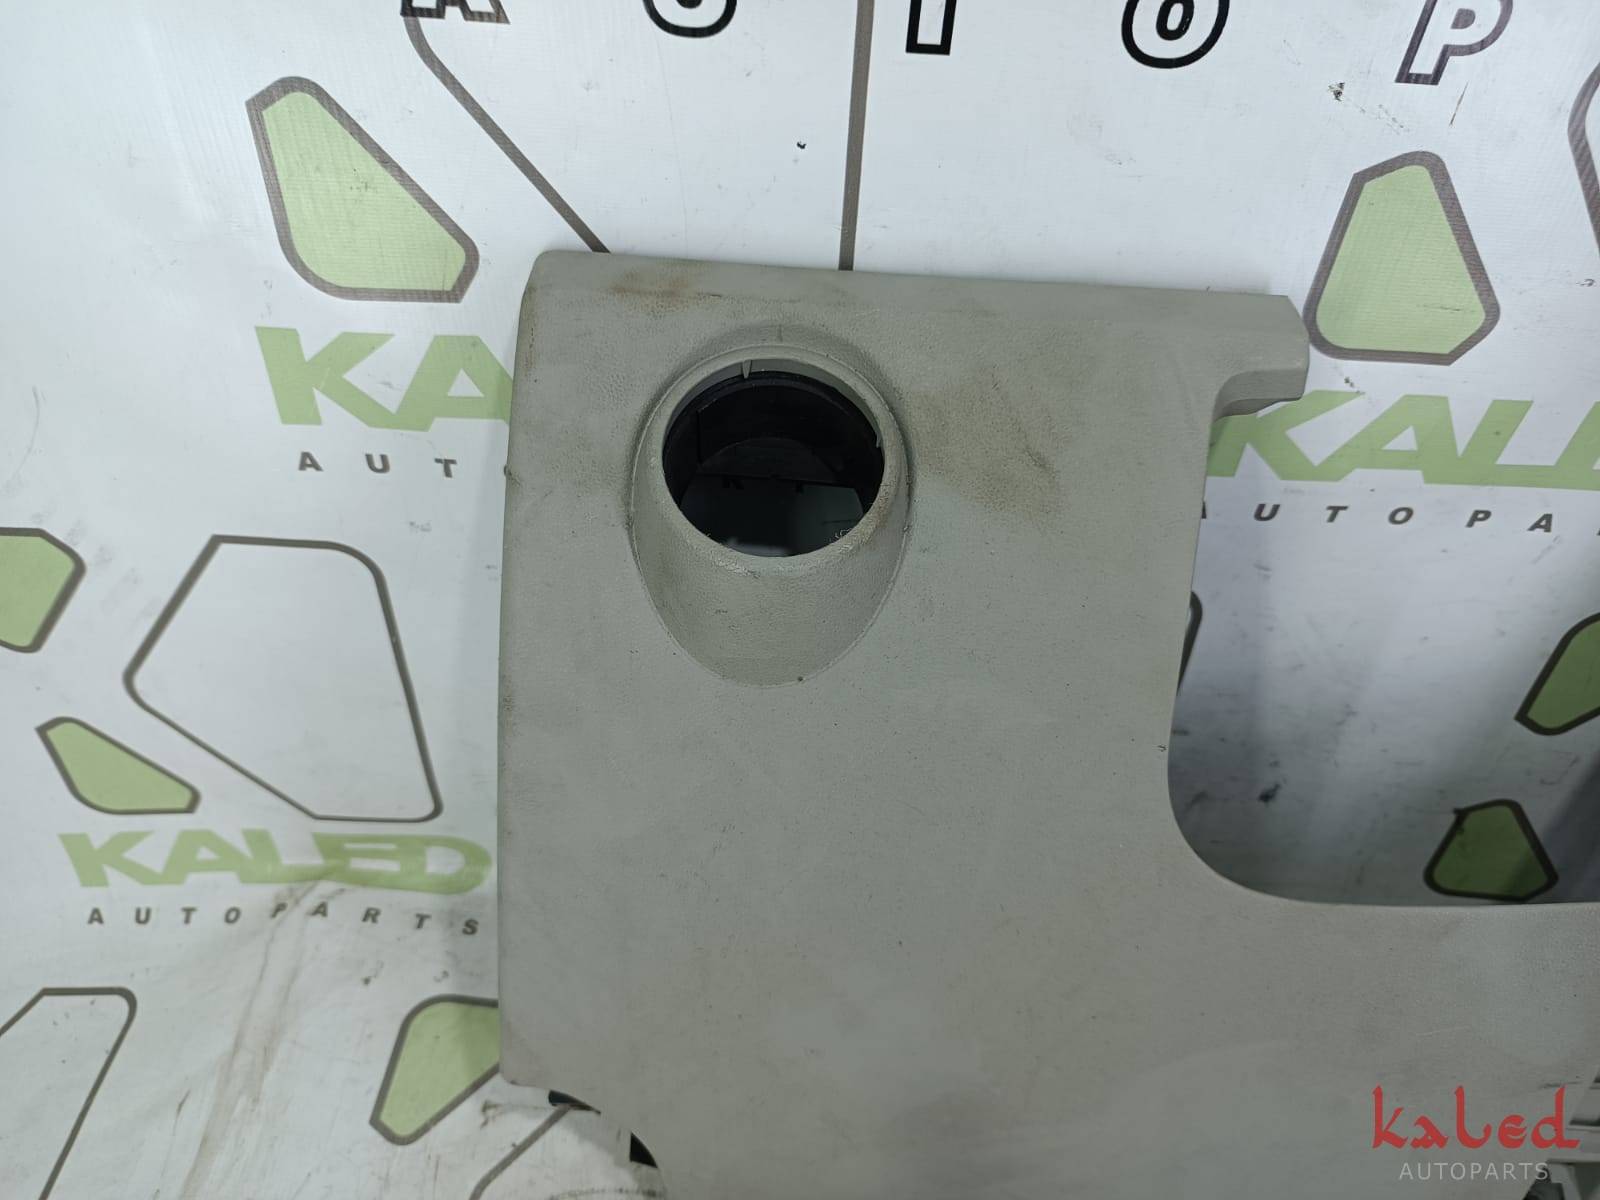 Tampa Inferior Painel VW UP TSI 2016 - Kaled Auto Parts